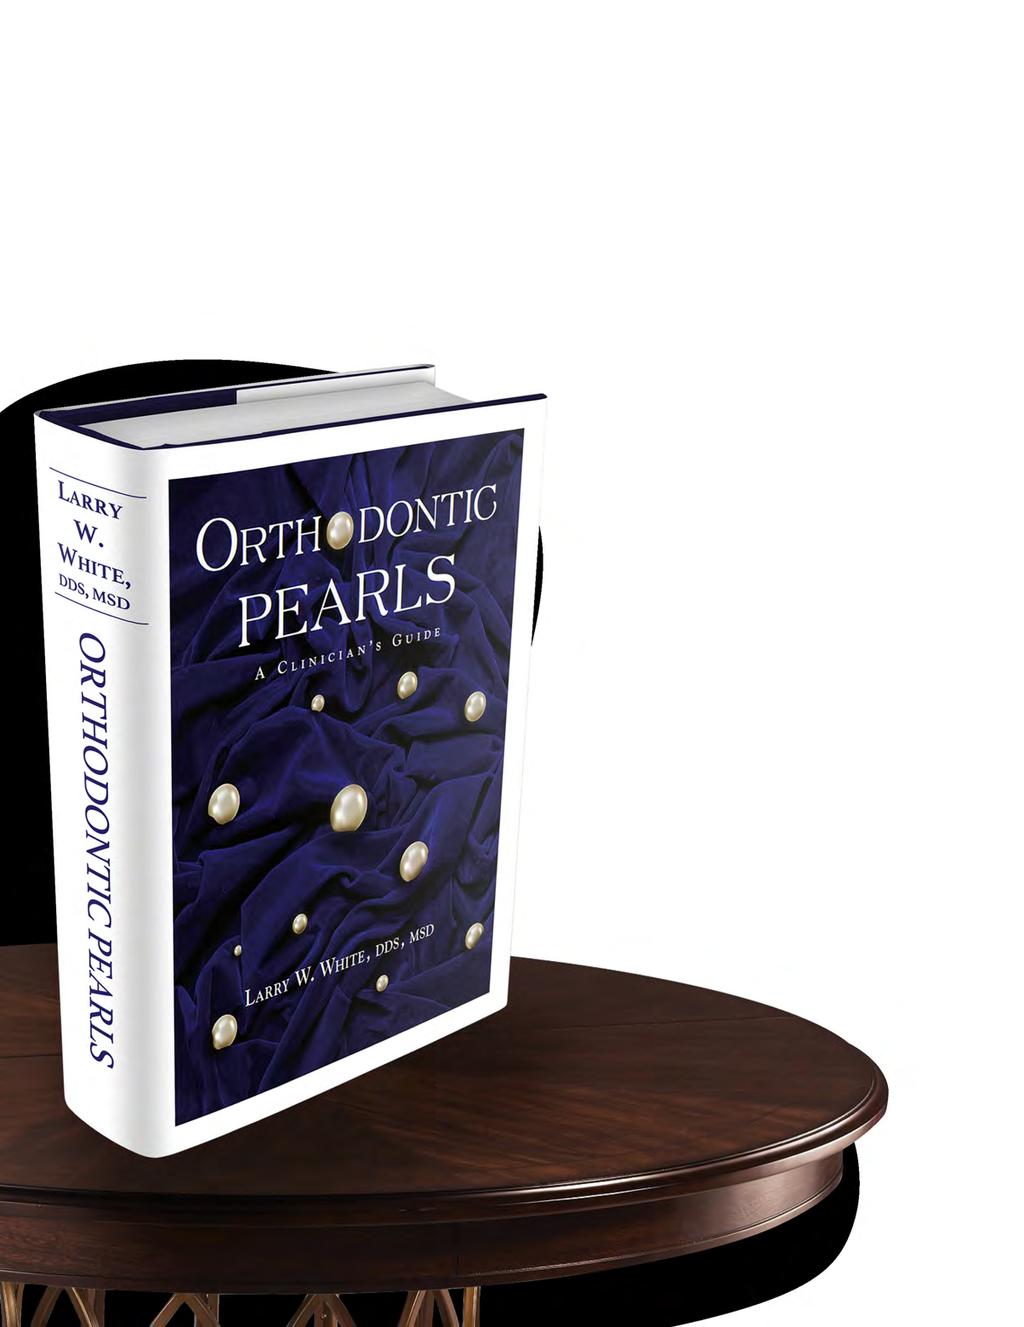 Orthodontic Pearls Author: r. Larry White,..S, M.S.. 40 Years of the most eclectic array of Orthodontic Pearls of wisdom ever accumulated in one publication.